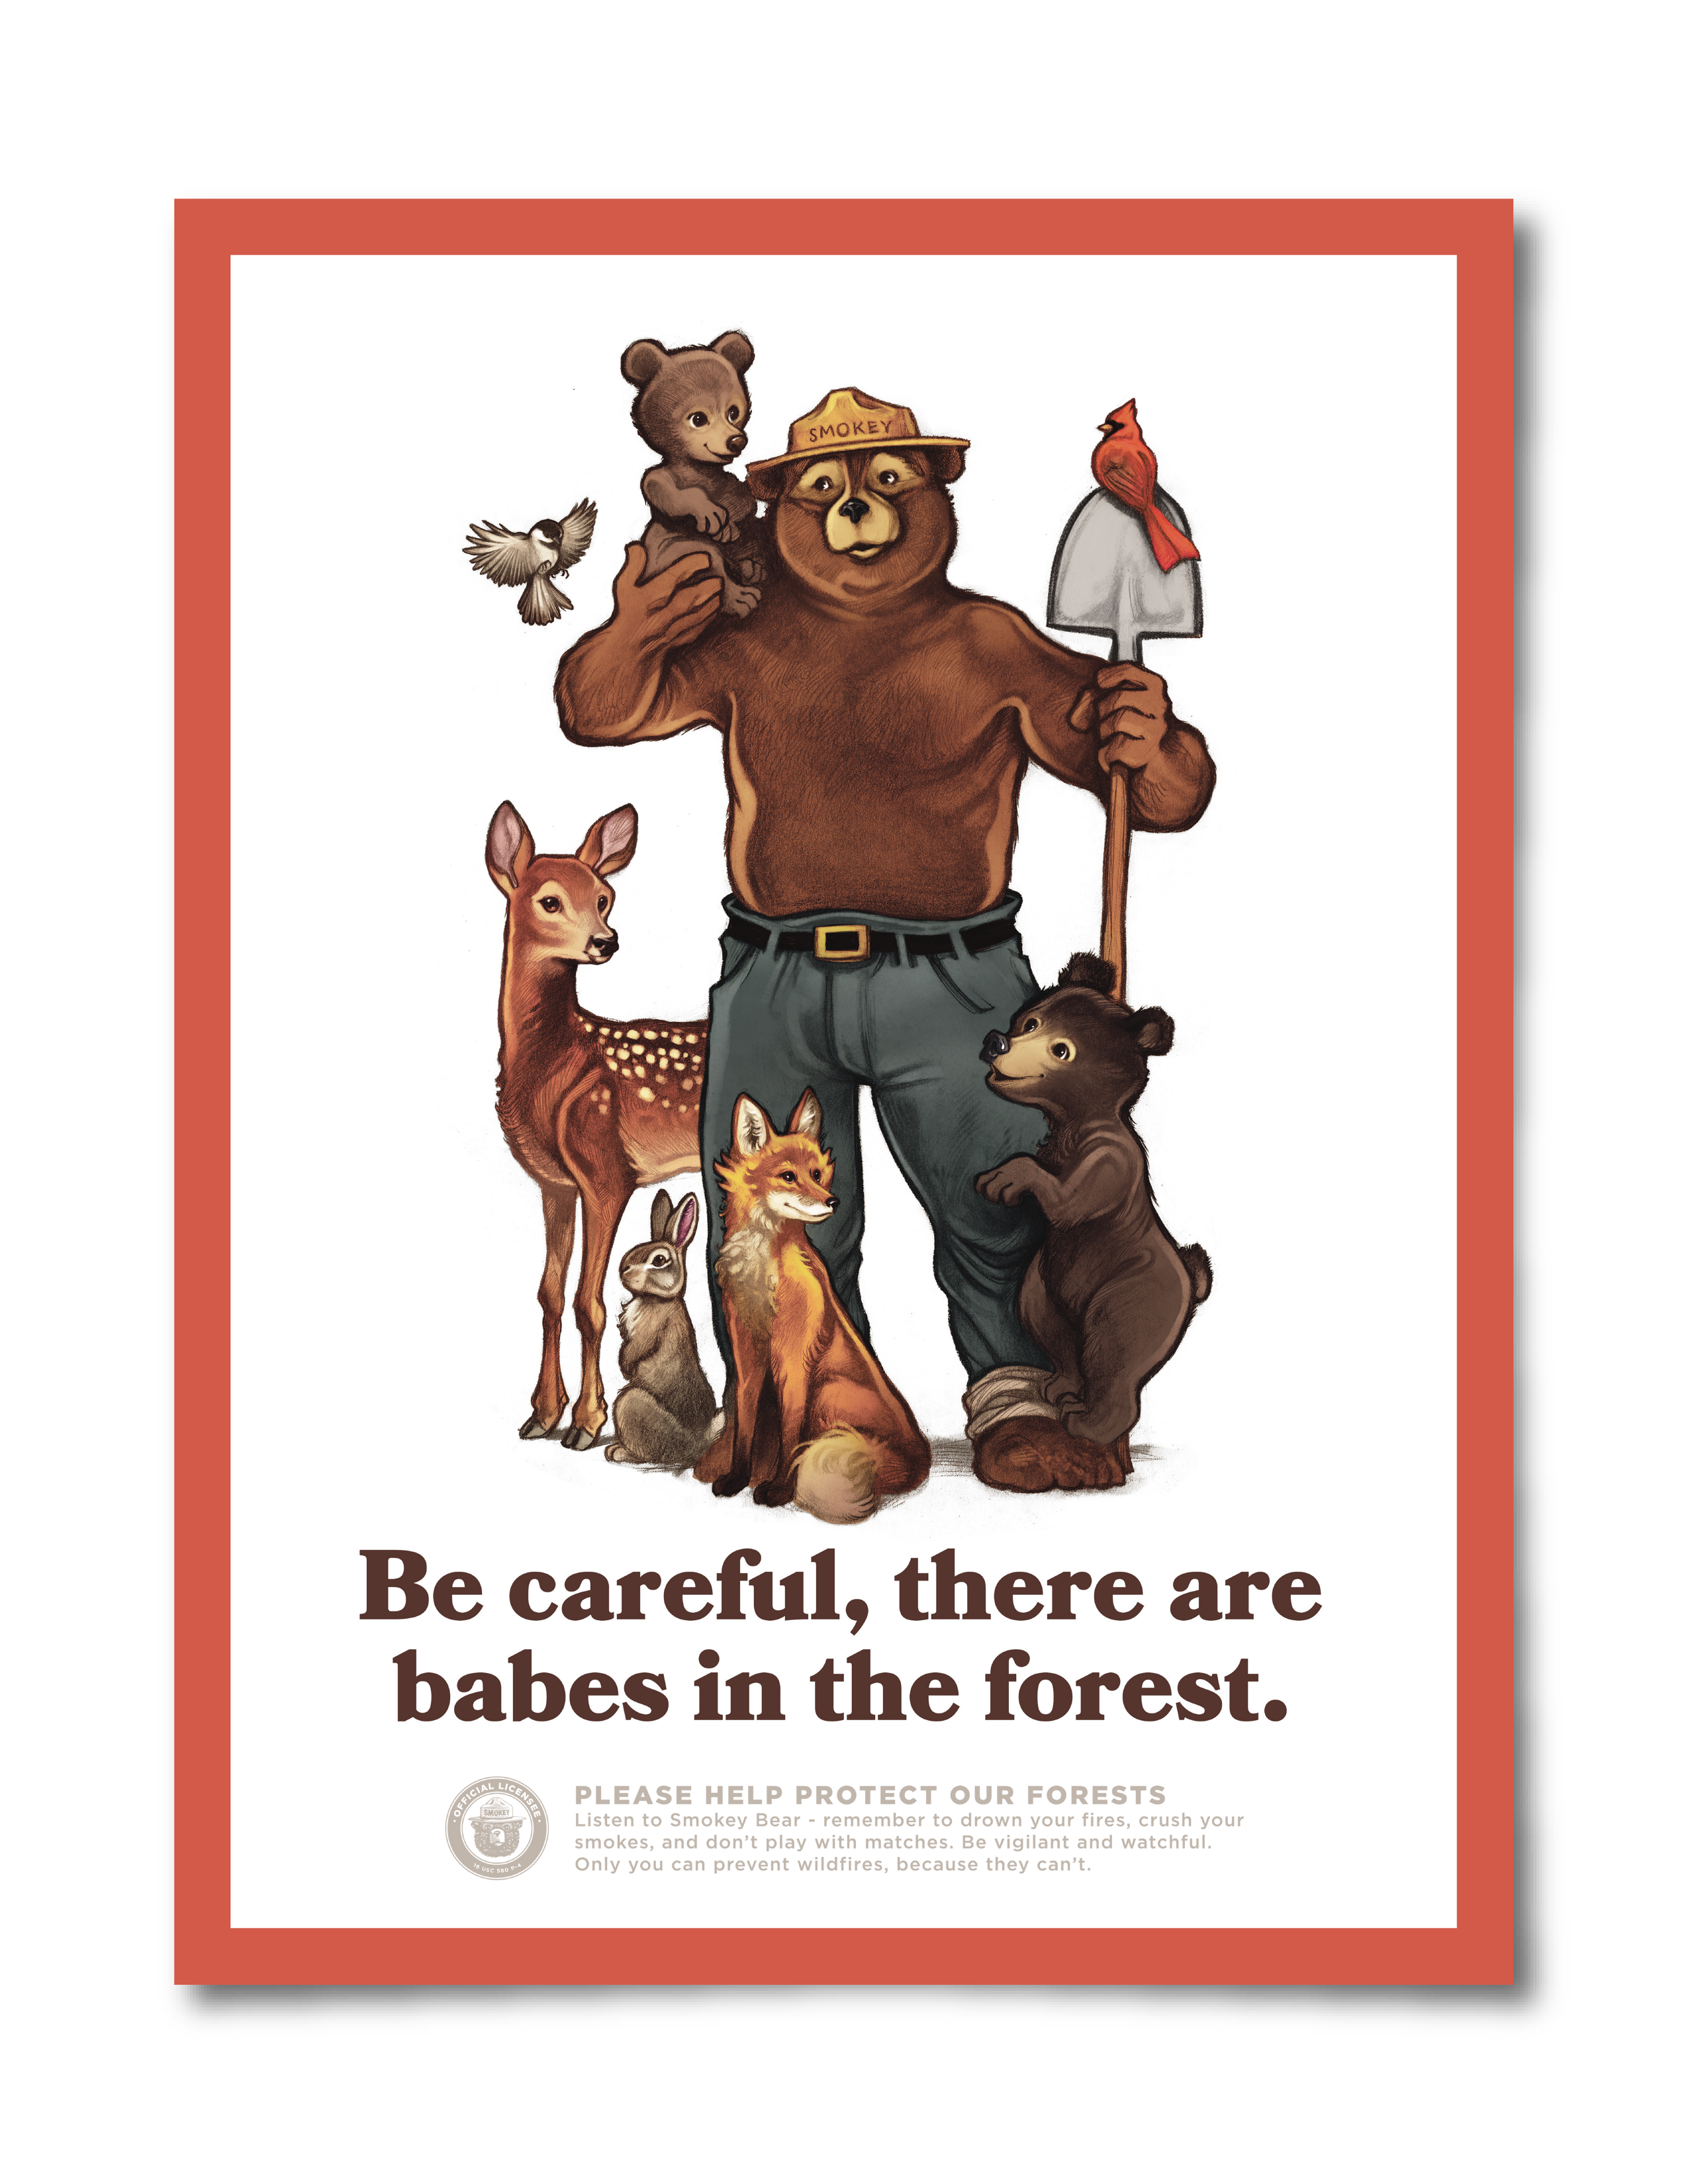 Play your part and protect our forests